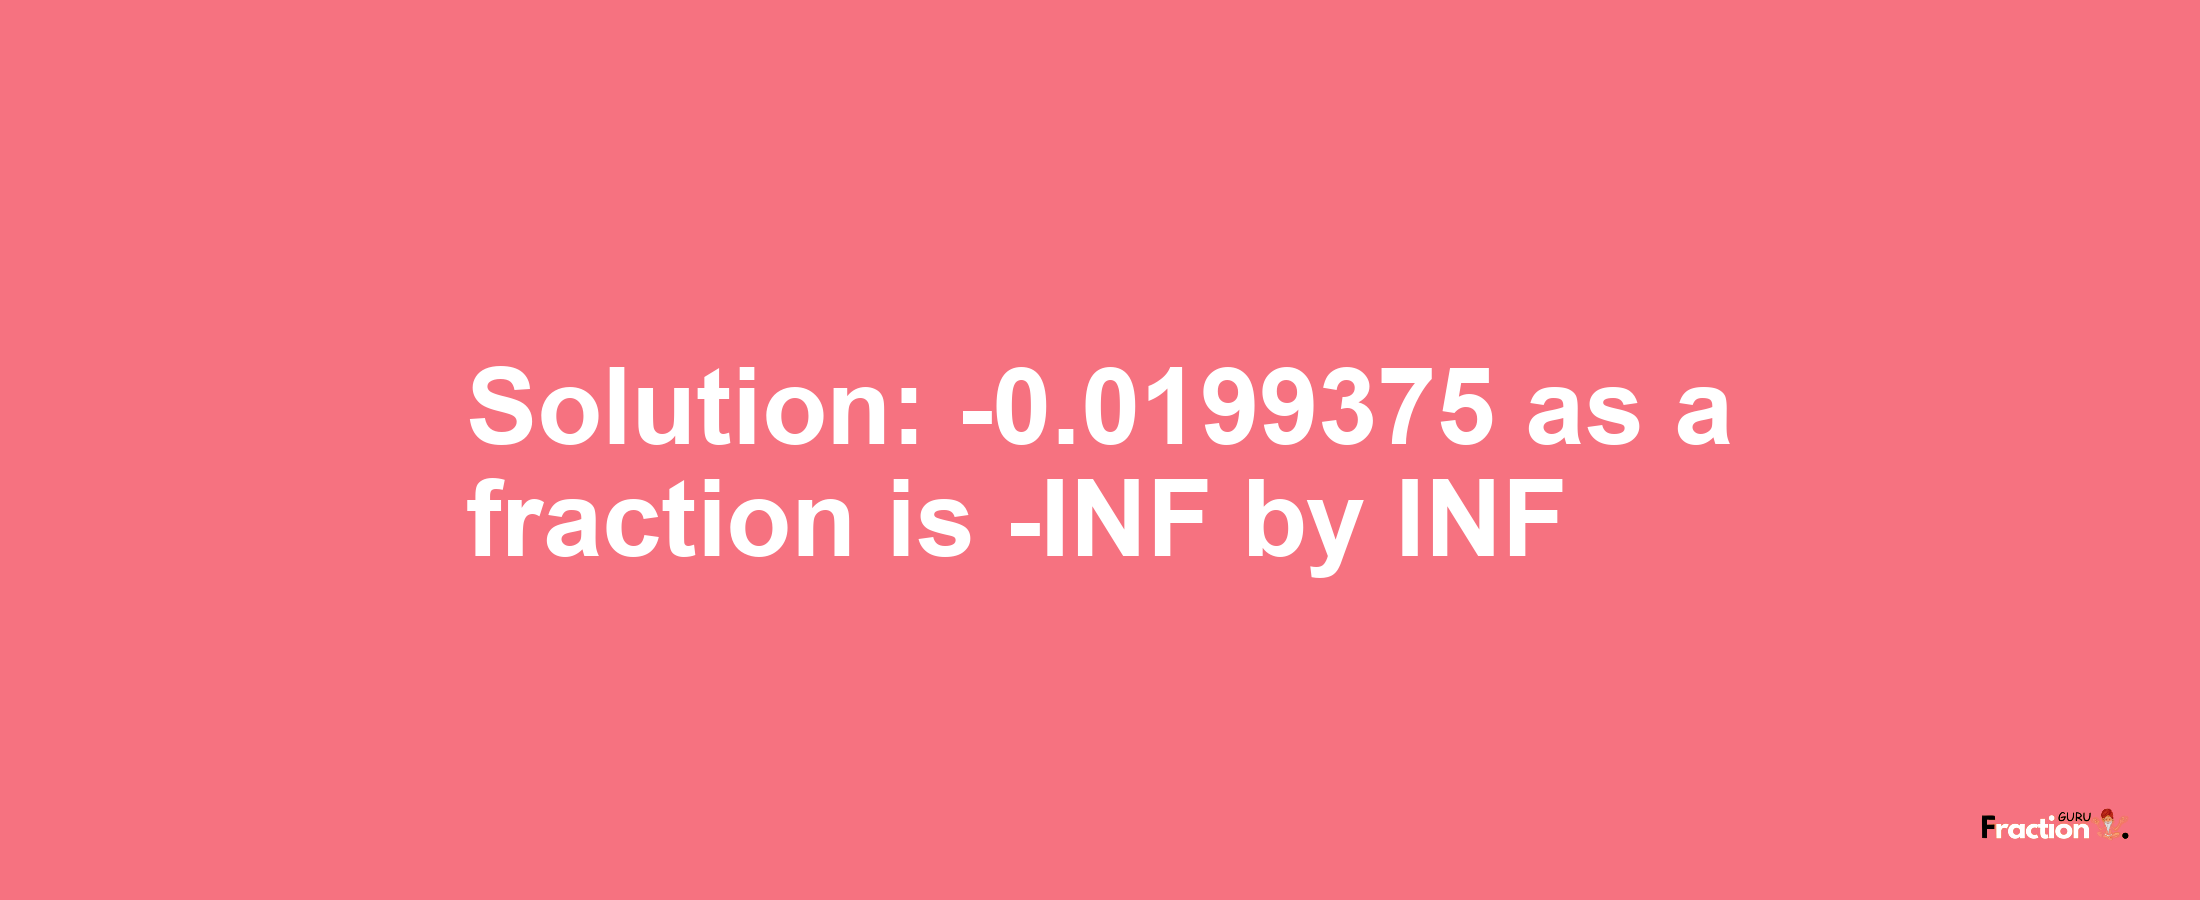 Solution:-0.0199375 as a fraction is -INF/INF